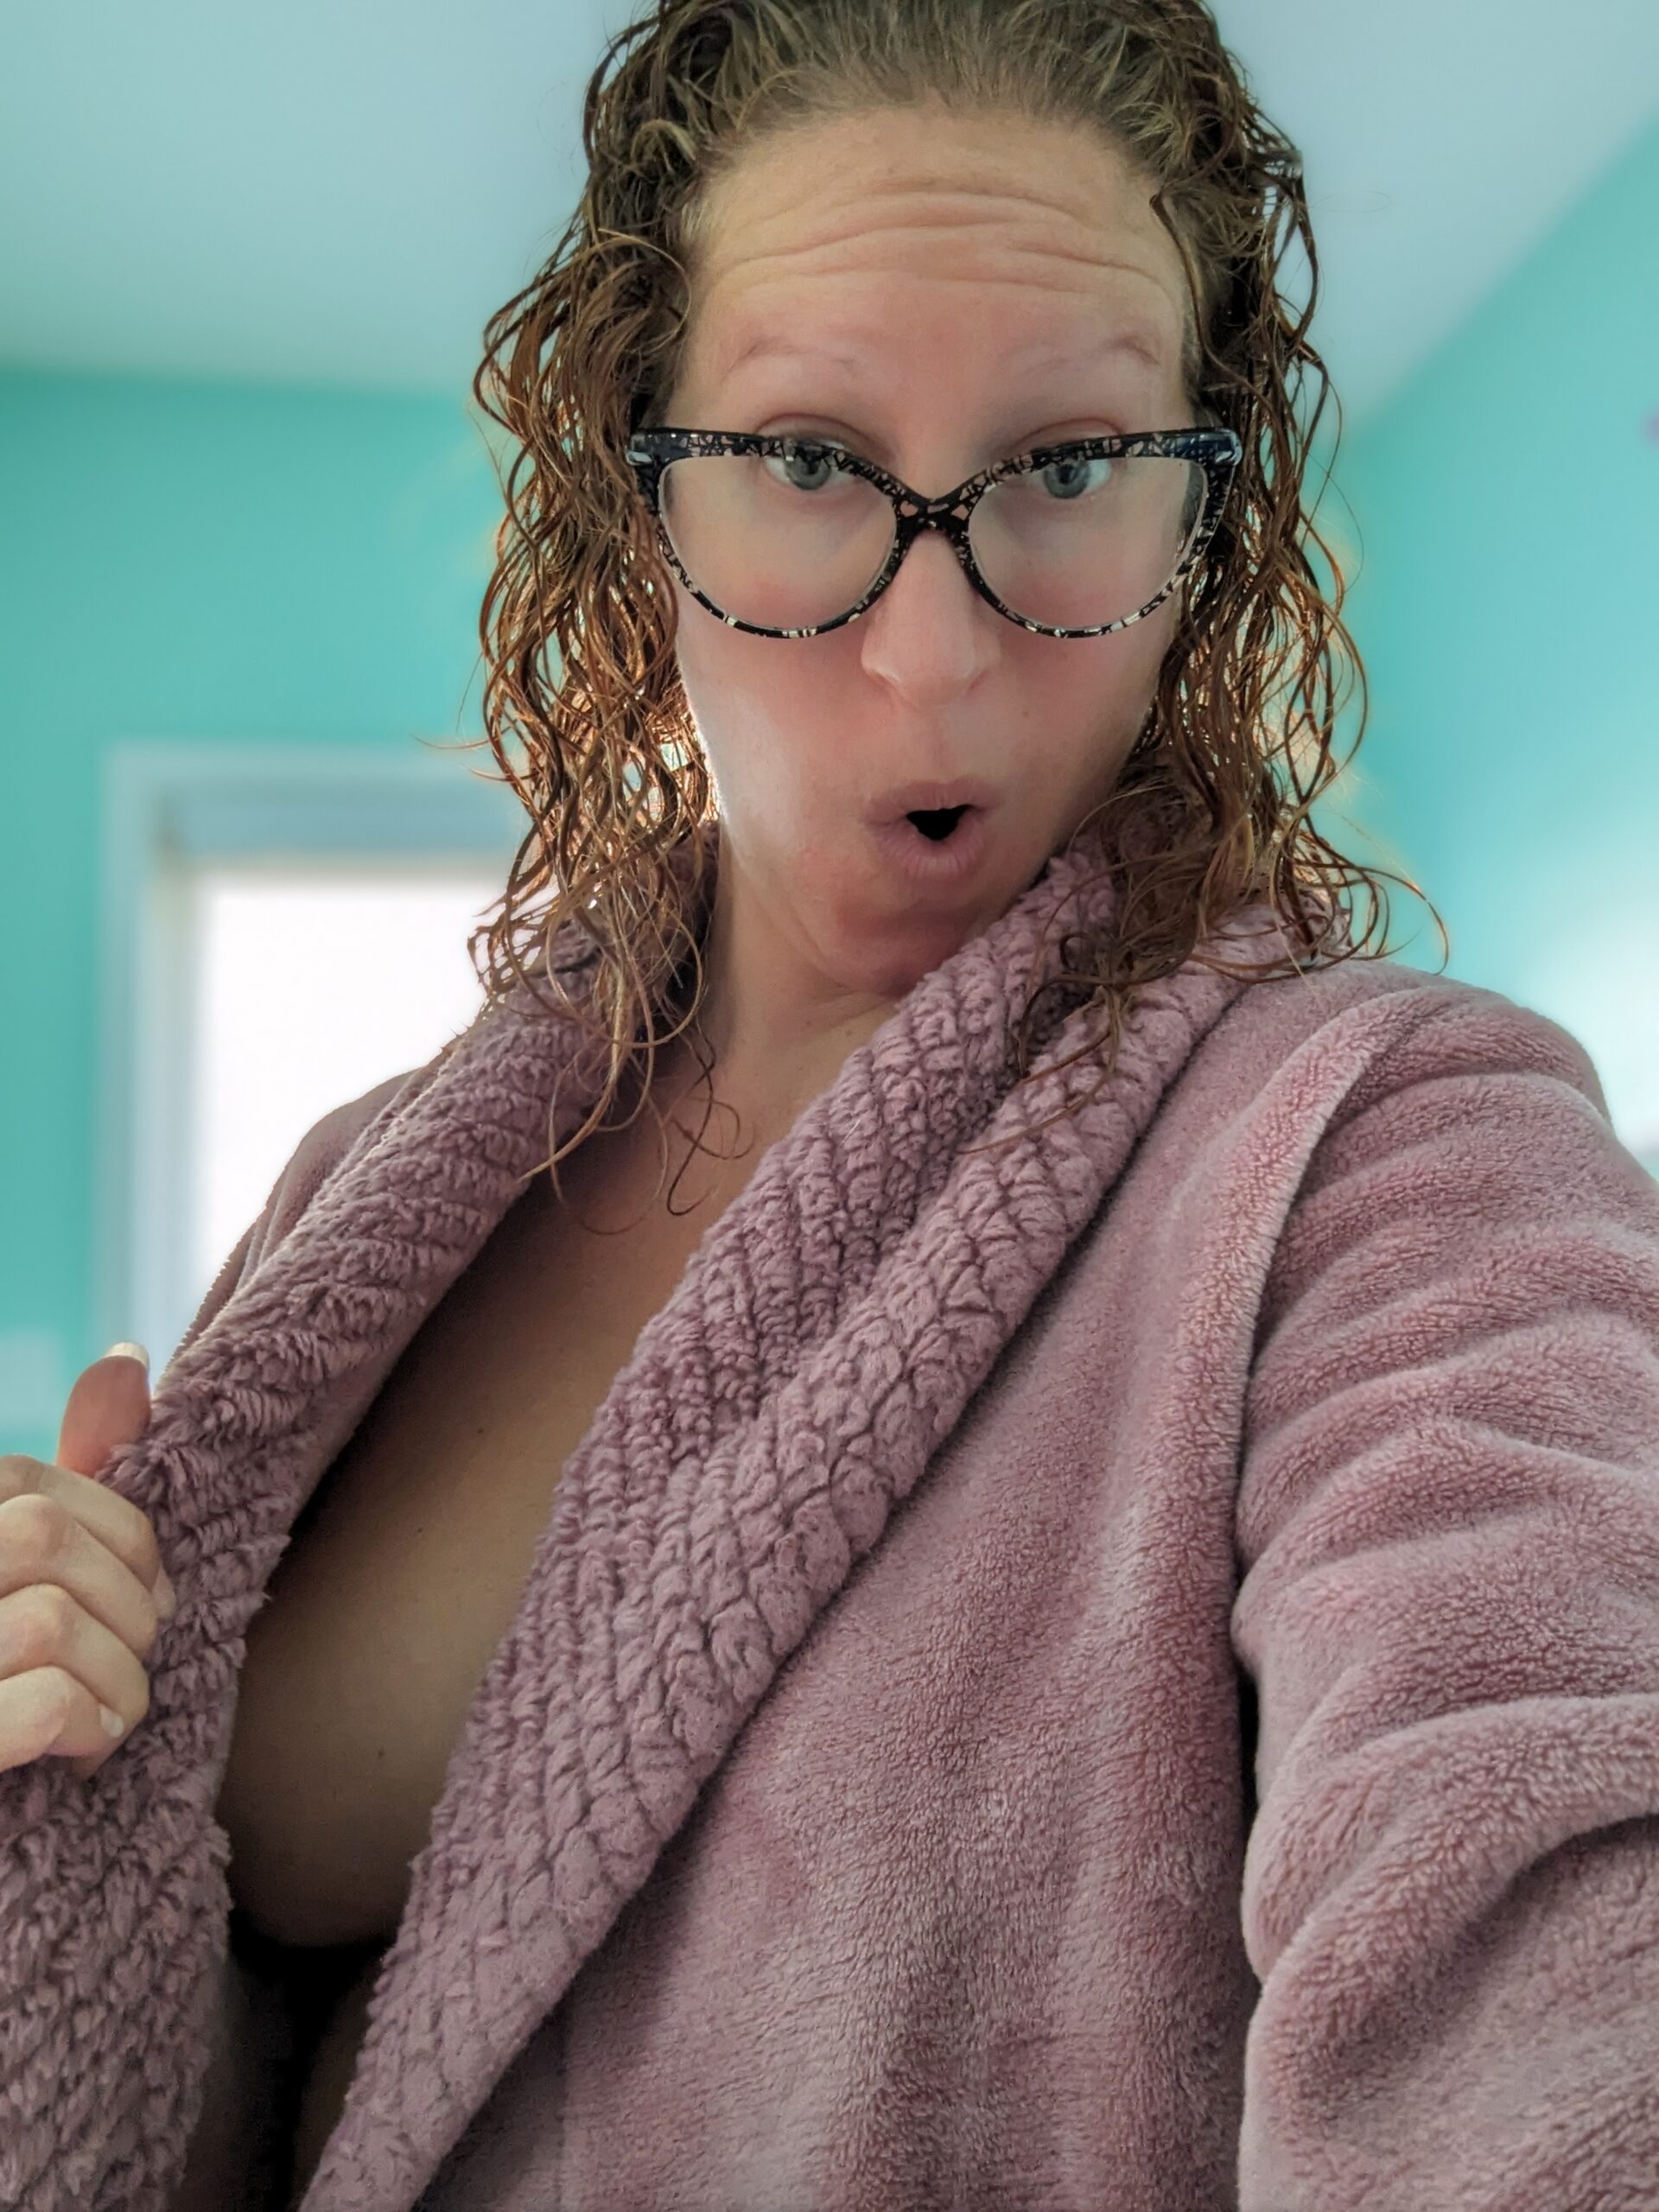 Nikki pulls her pink bathrobe aside to almost expose a breast. A cheeky expression on her face.